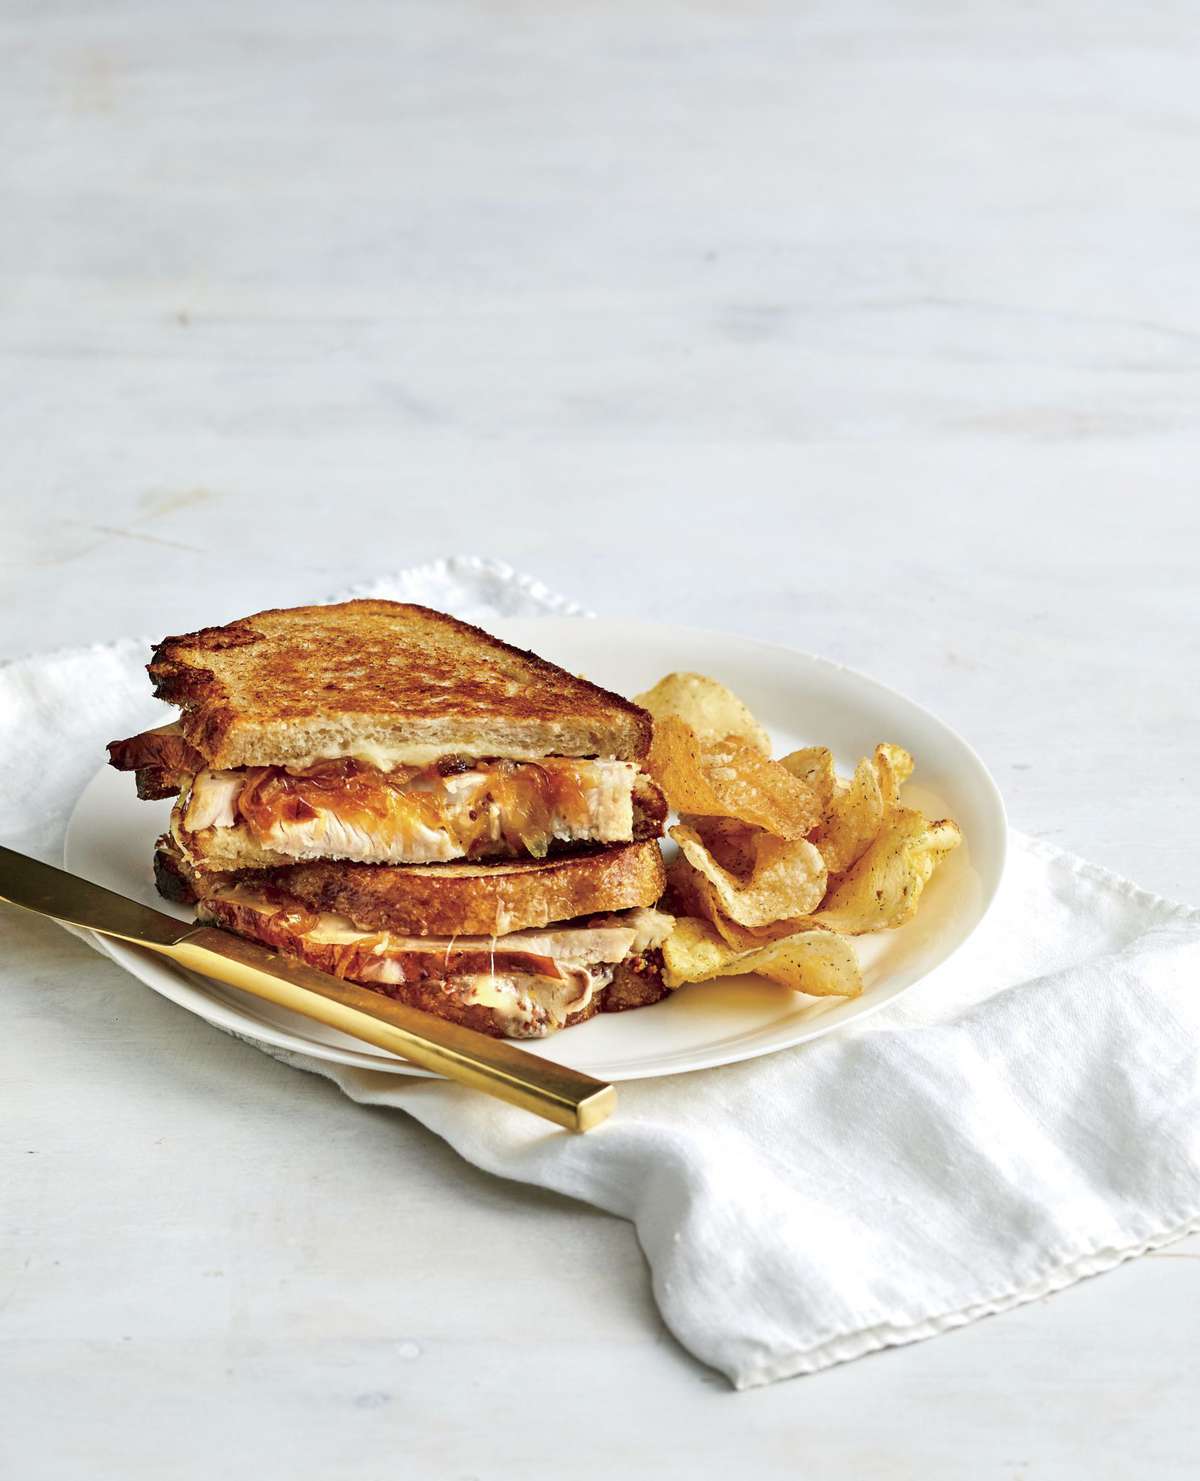 Turkey, Caramelized Onion, and Gruyère Grilled Cheese